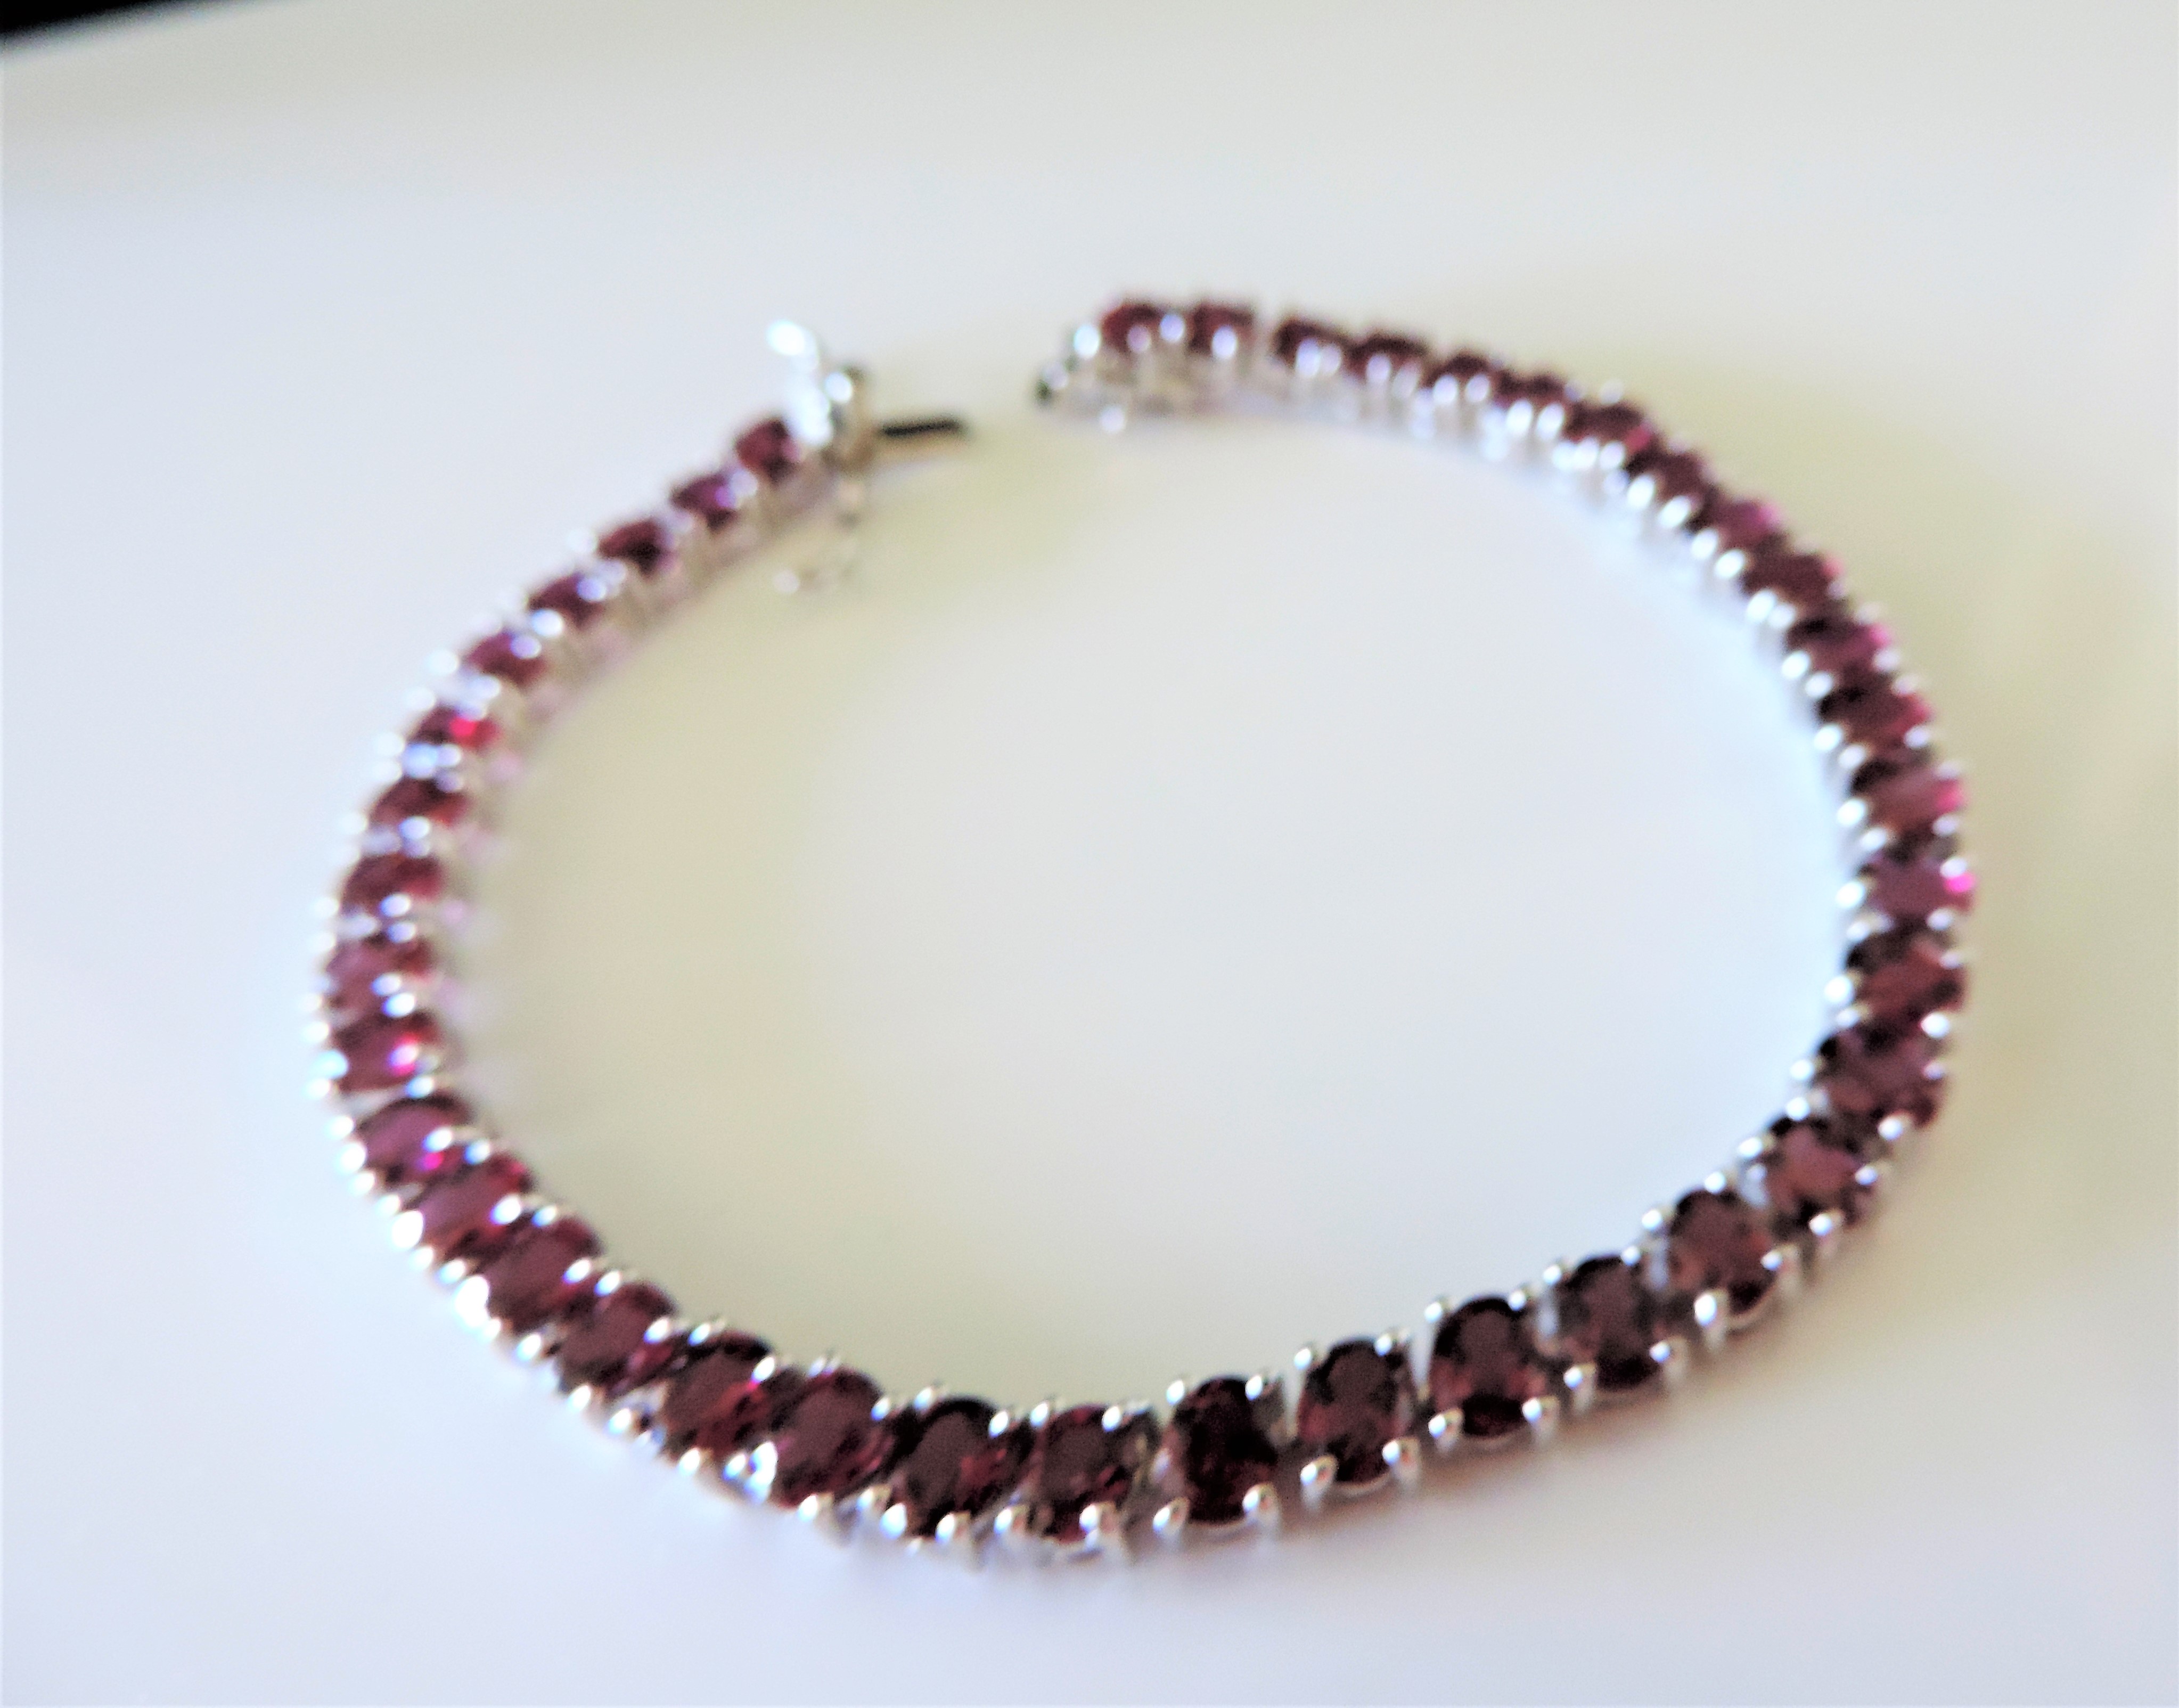 20ct Pink Tourmaline Tennis Bracelet in Sterling Silver - Image 3 of 6